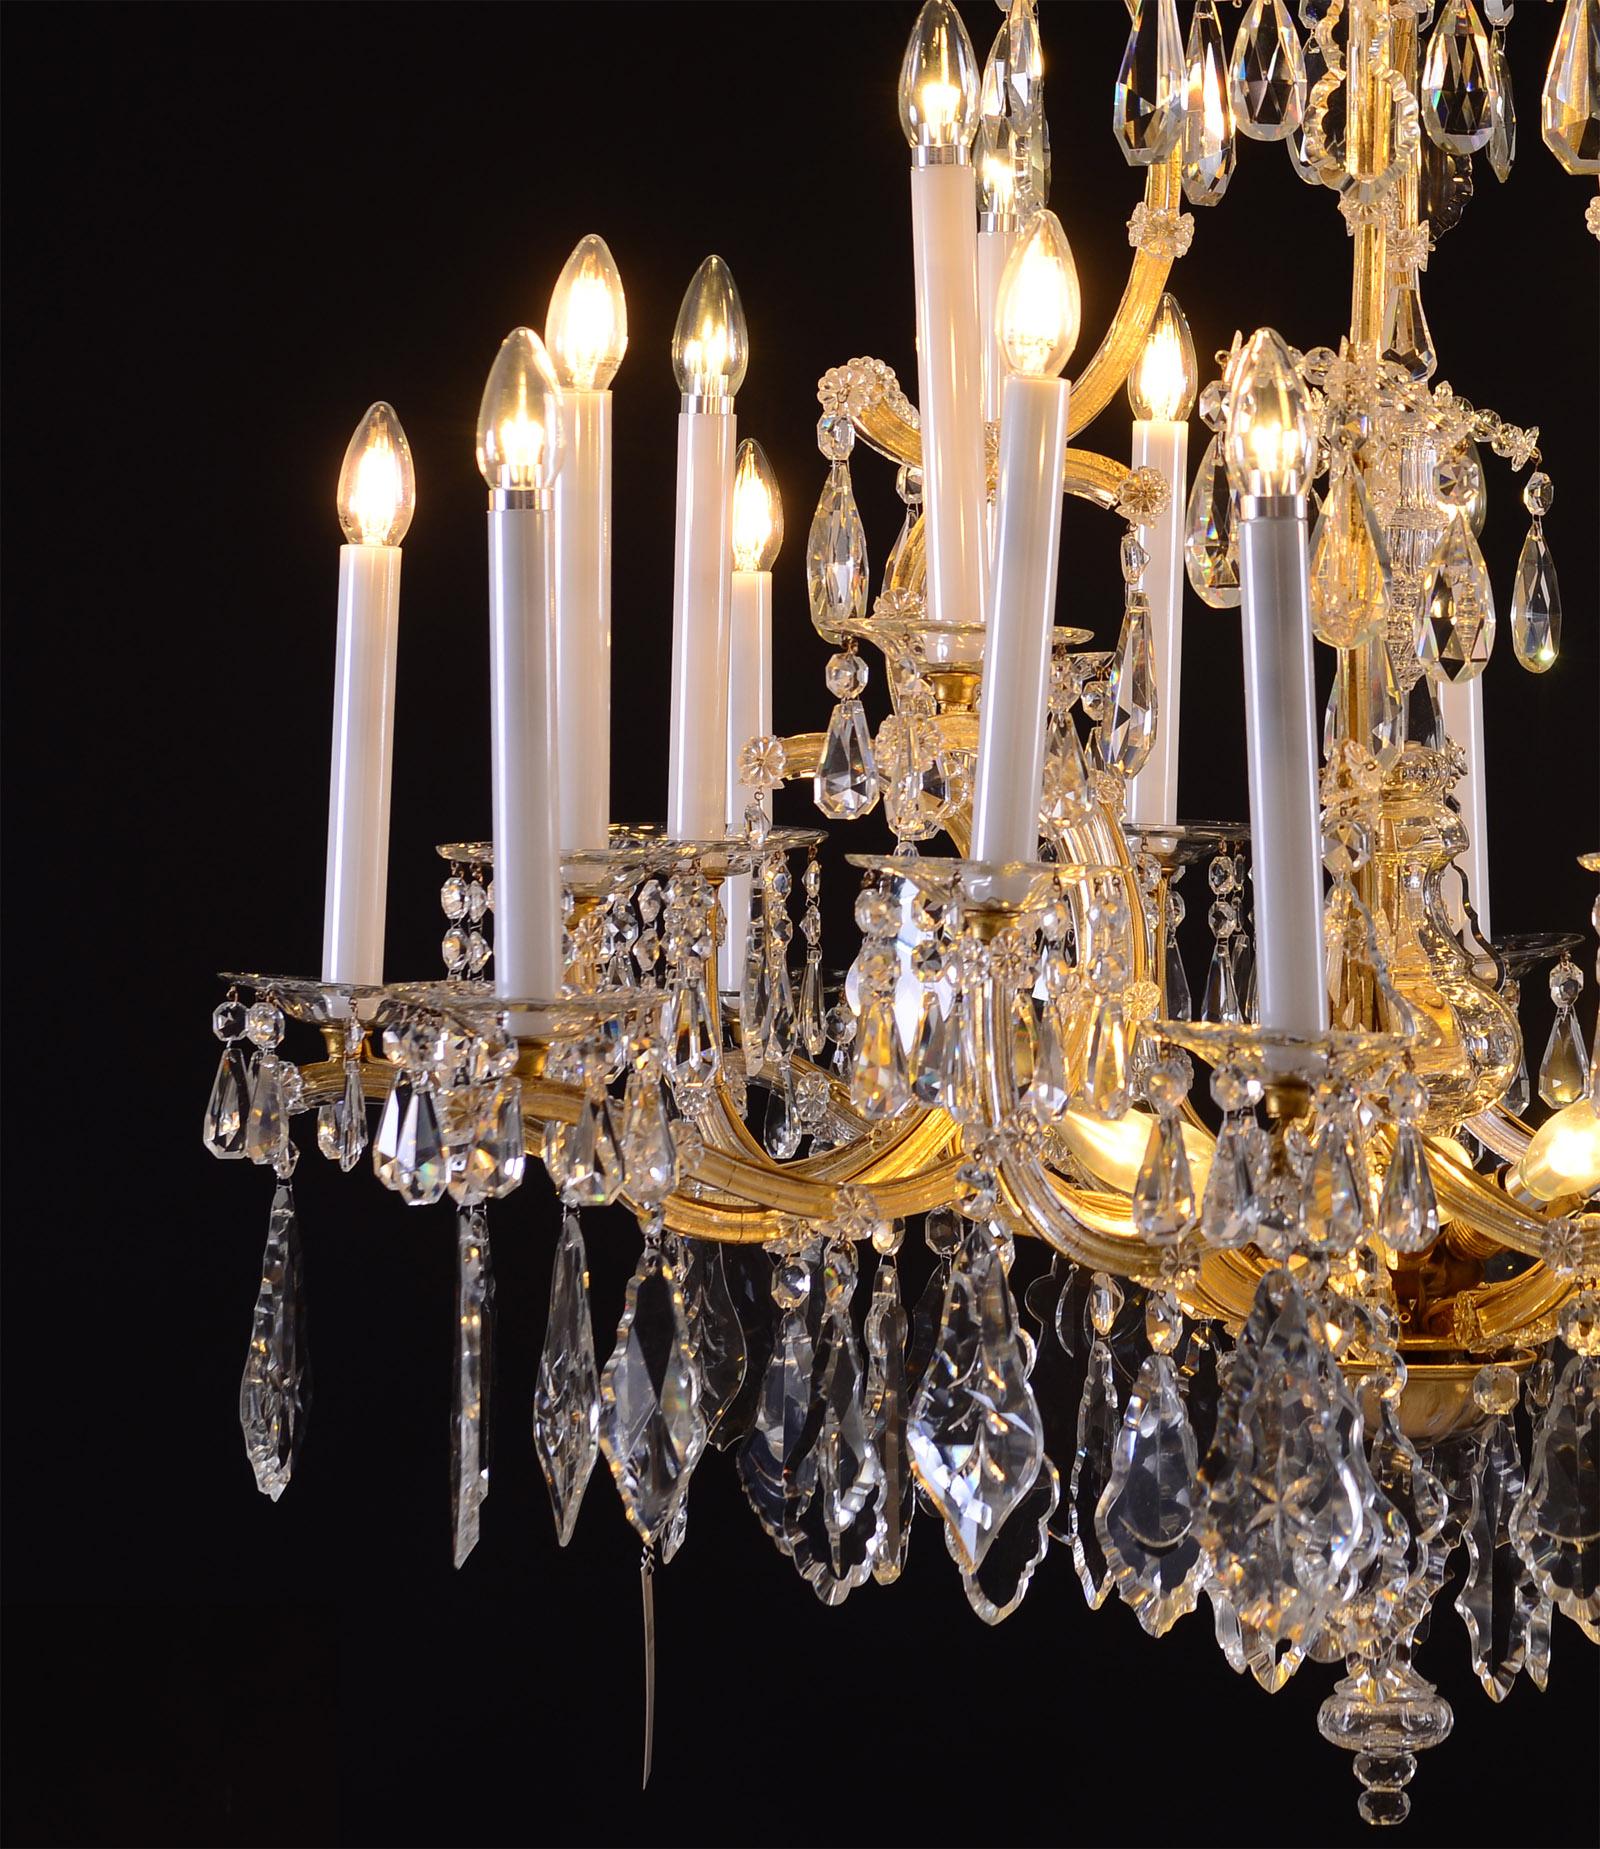 Original Lobmeyr Maria Theresien Crystal Chandelier, Richly Decorated 28 Lights In Good Condition For Sale In Vienna, AT